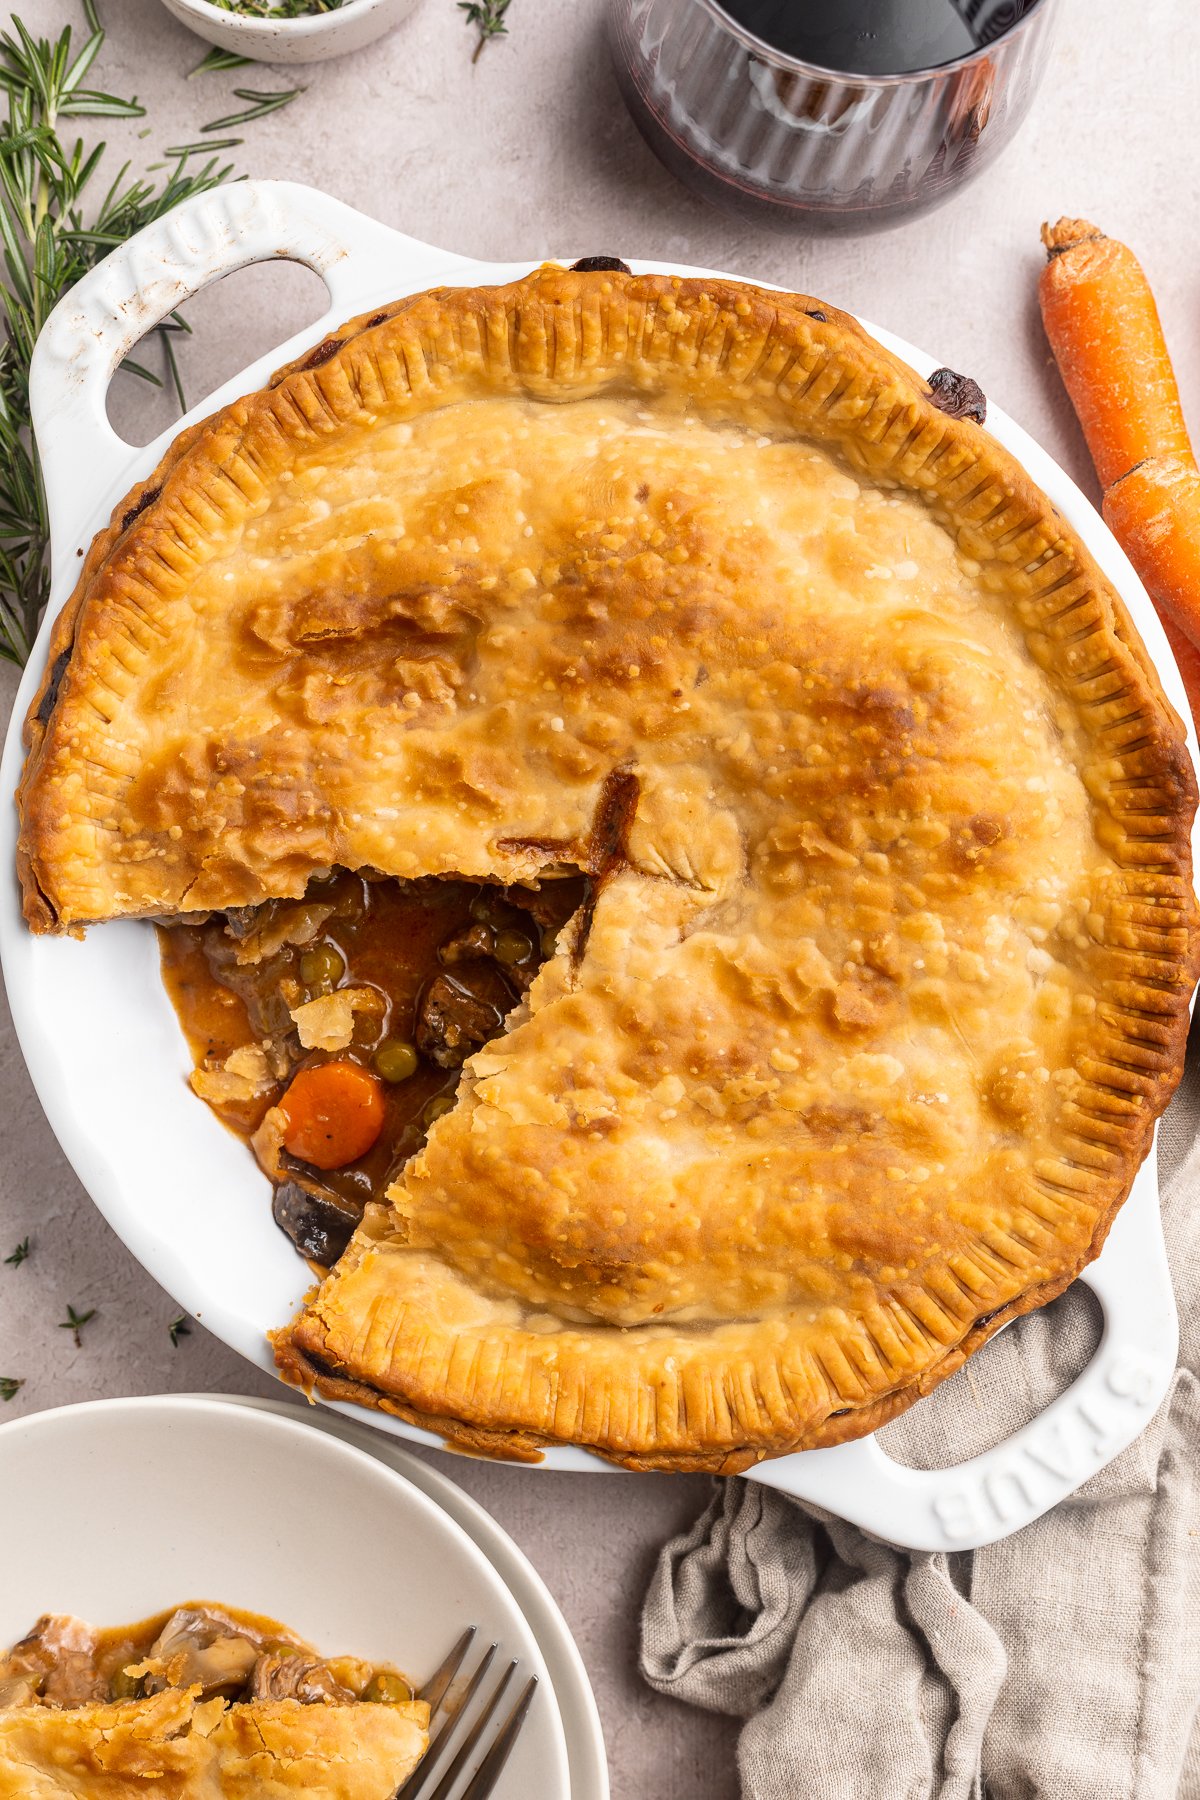 Overhead view of a beef pot pie with one wedge-shaped piece missing from the bottom left side of the pie dish.